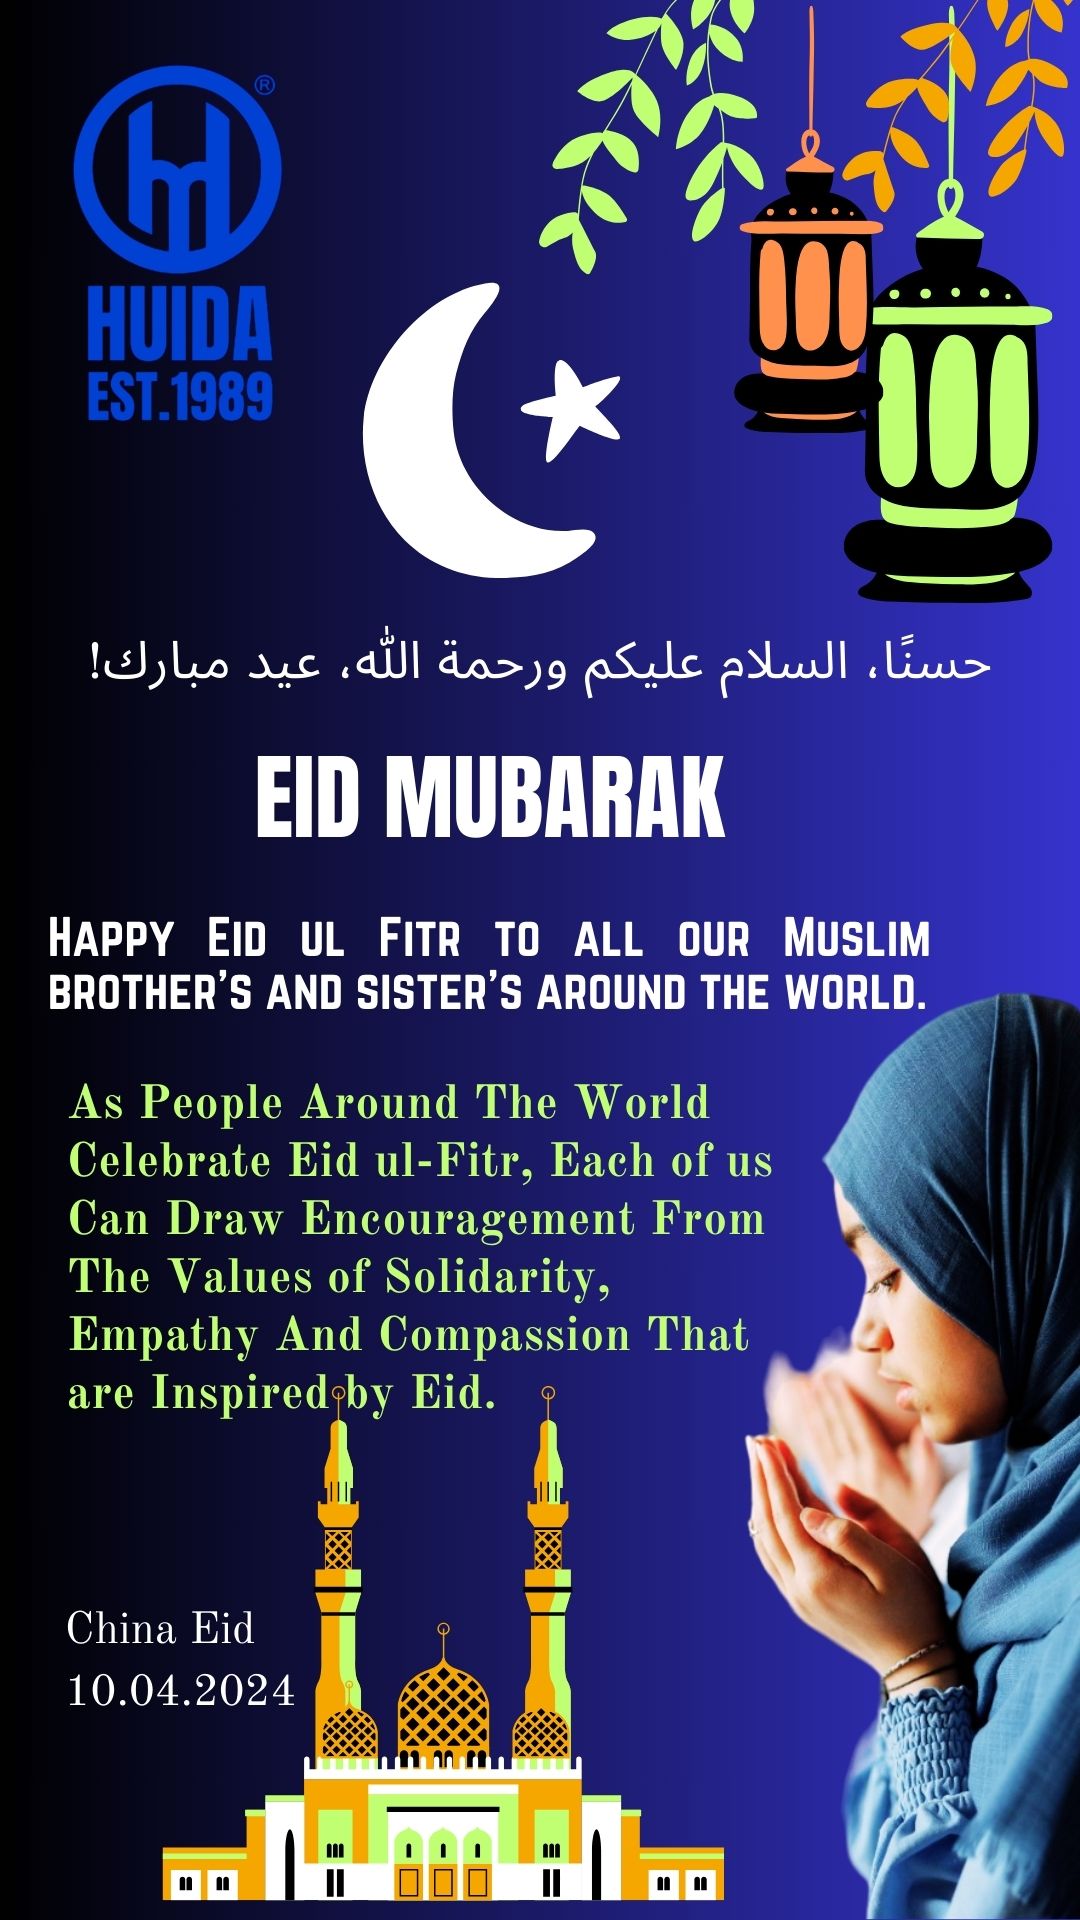 Happy Eid ul Fitr to all our Muslim brothers and sisters around the world.